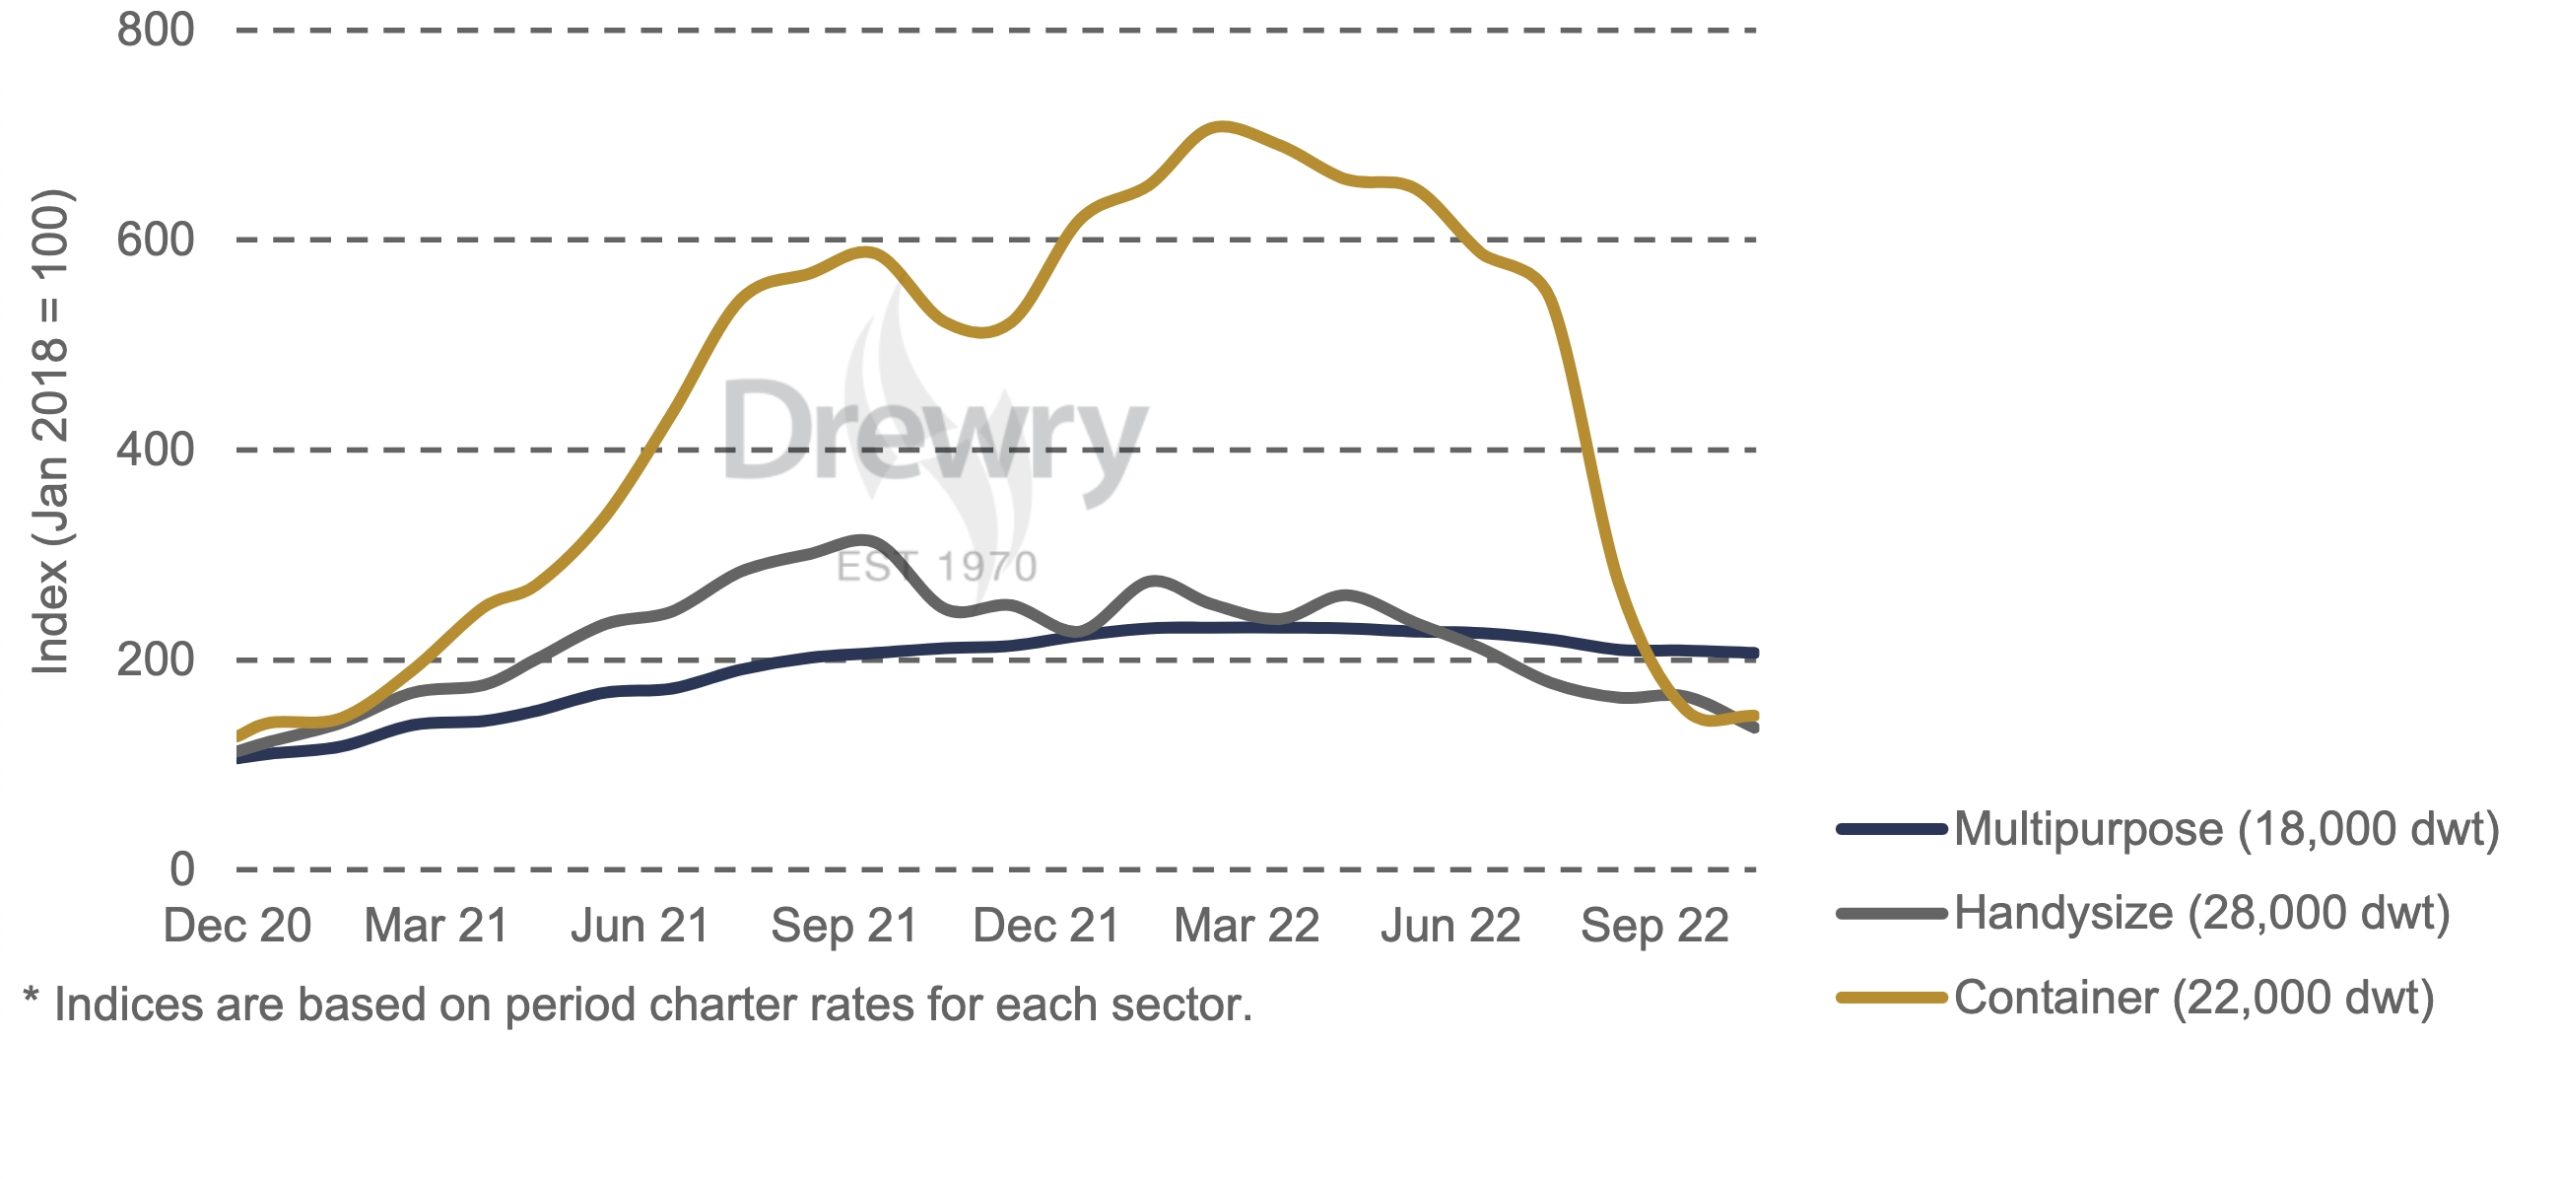 Drewry: demand for multipurpose vessels keeps them above competing sectors